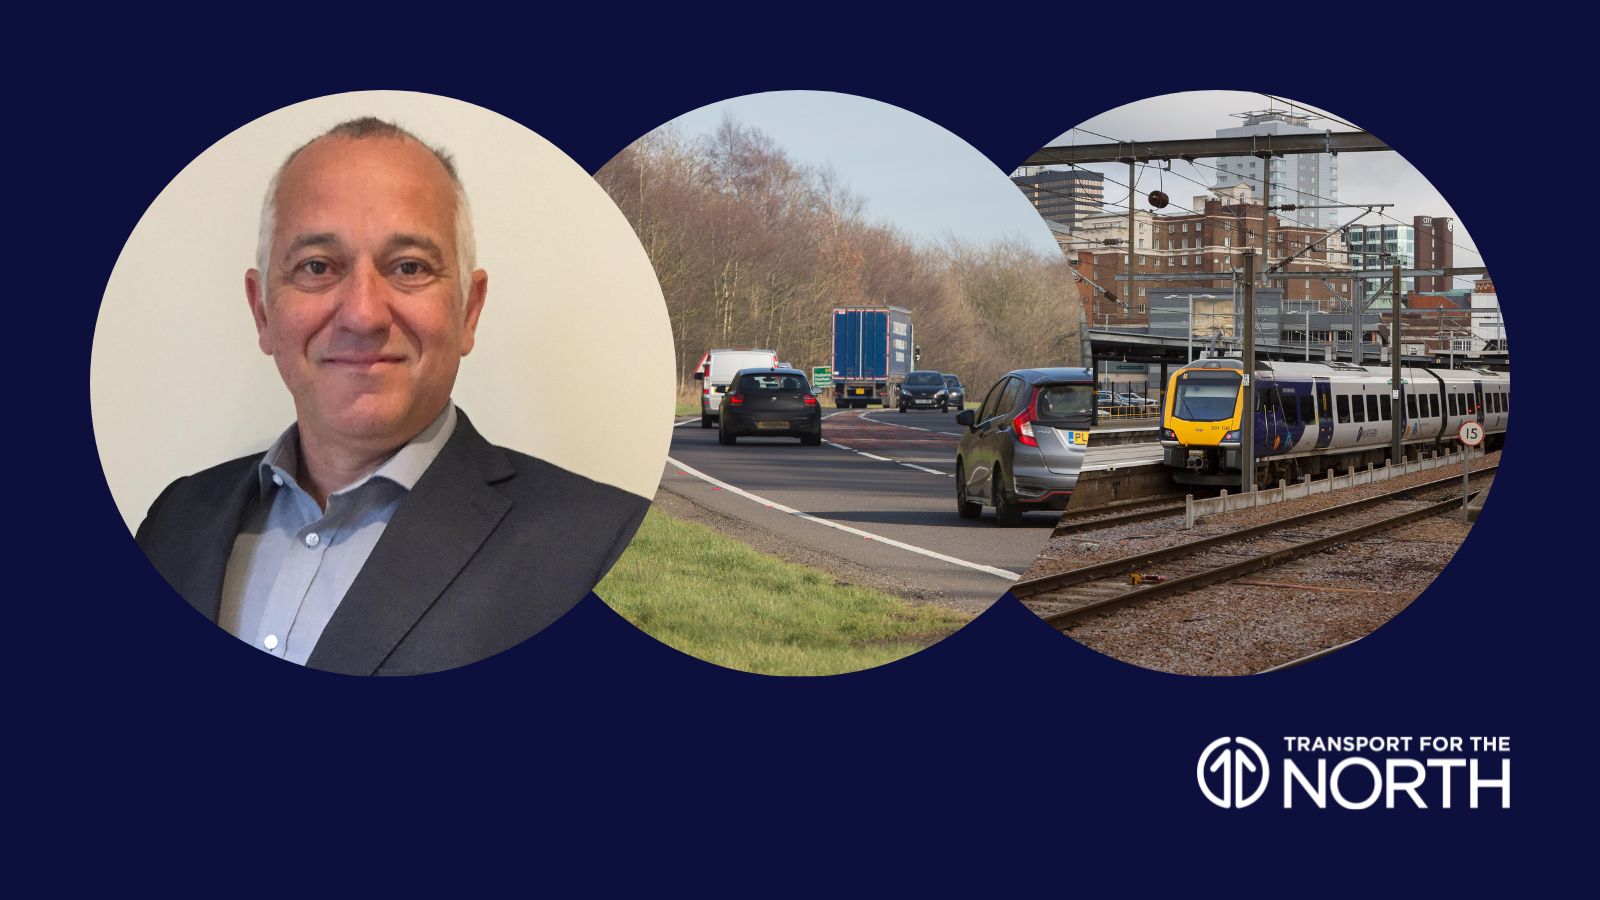 New Roads and rail director appointed at Transport for the North